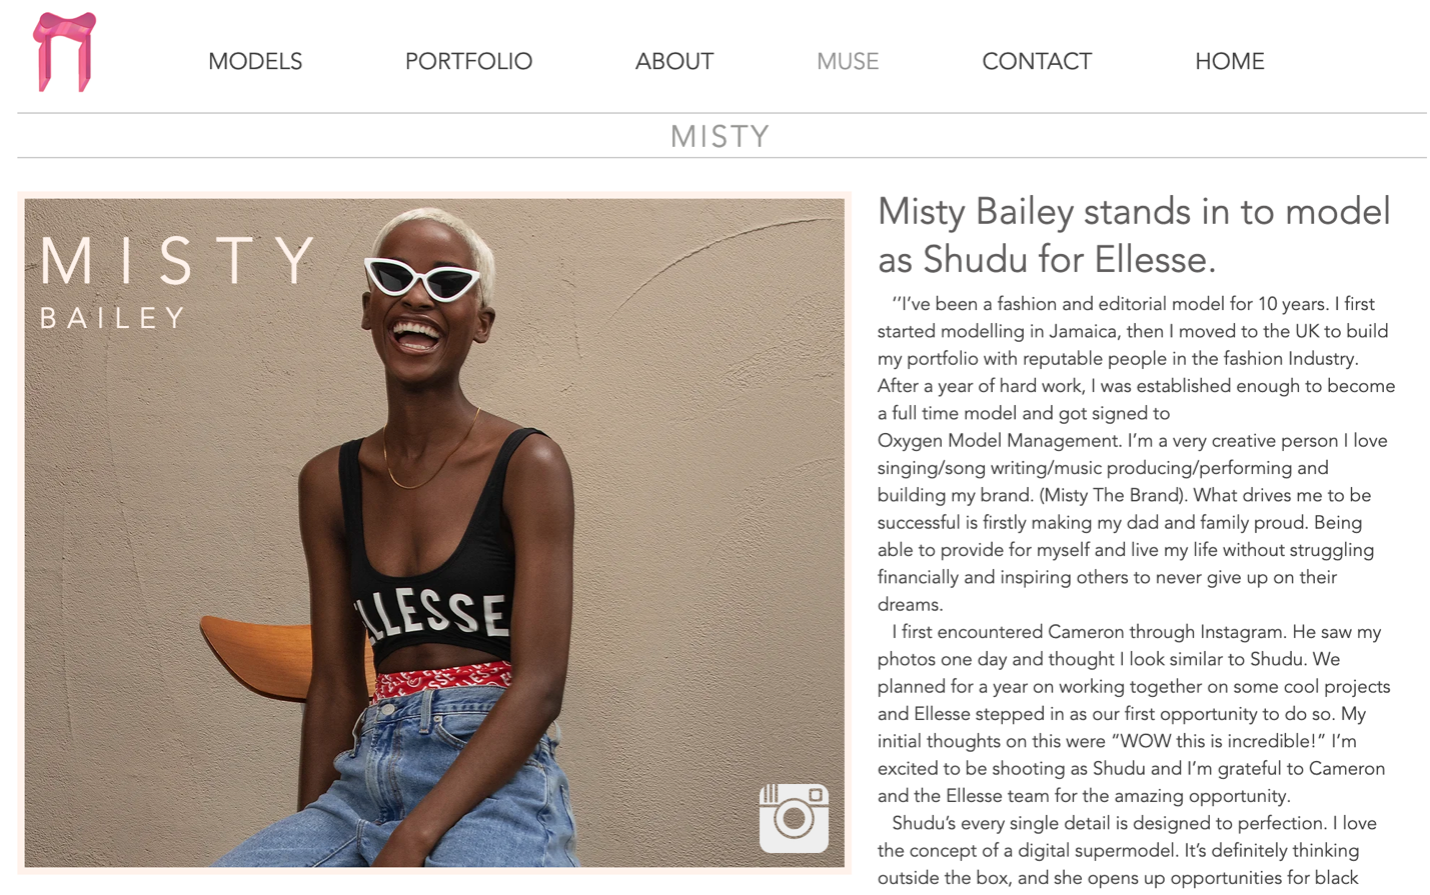 Online News Publication with the image of a Black woman in a tanktop, sunglasses, and bleached hair, laughing. Headline reads Misty Bailey stands in to model as Shudu for Ellesse.